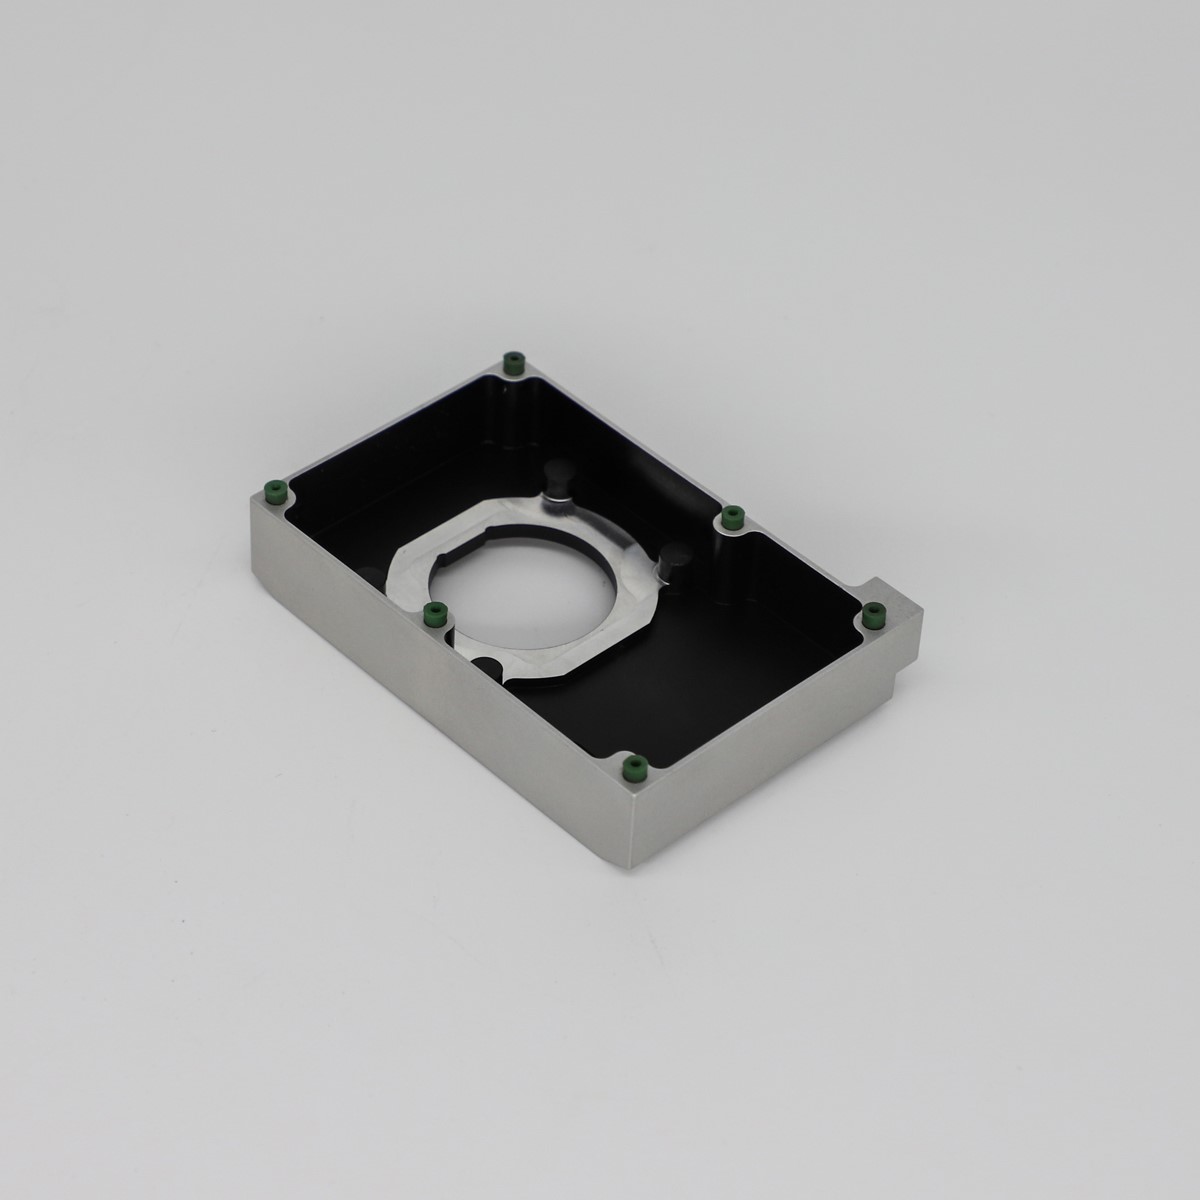 Xavier housing cnc camera housing parts excellent quality at discount-4